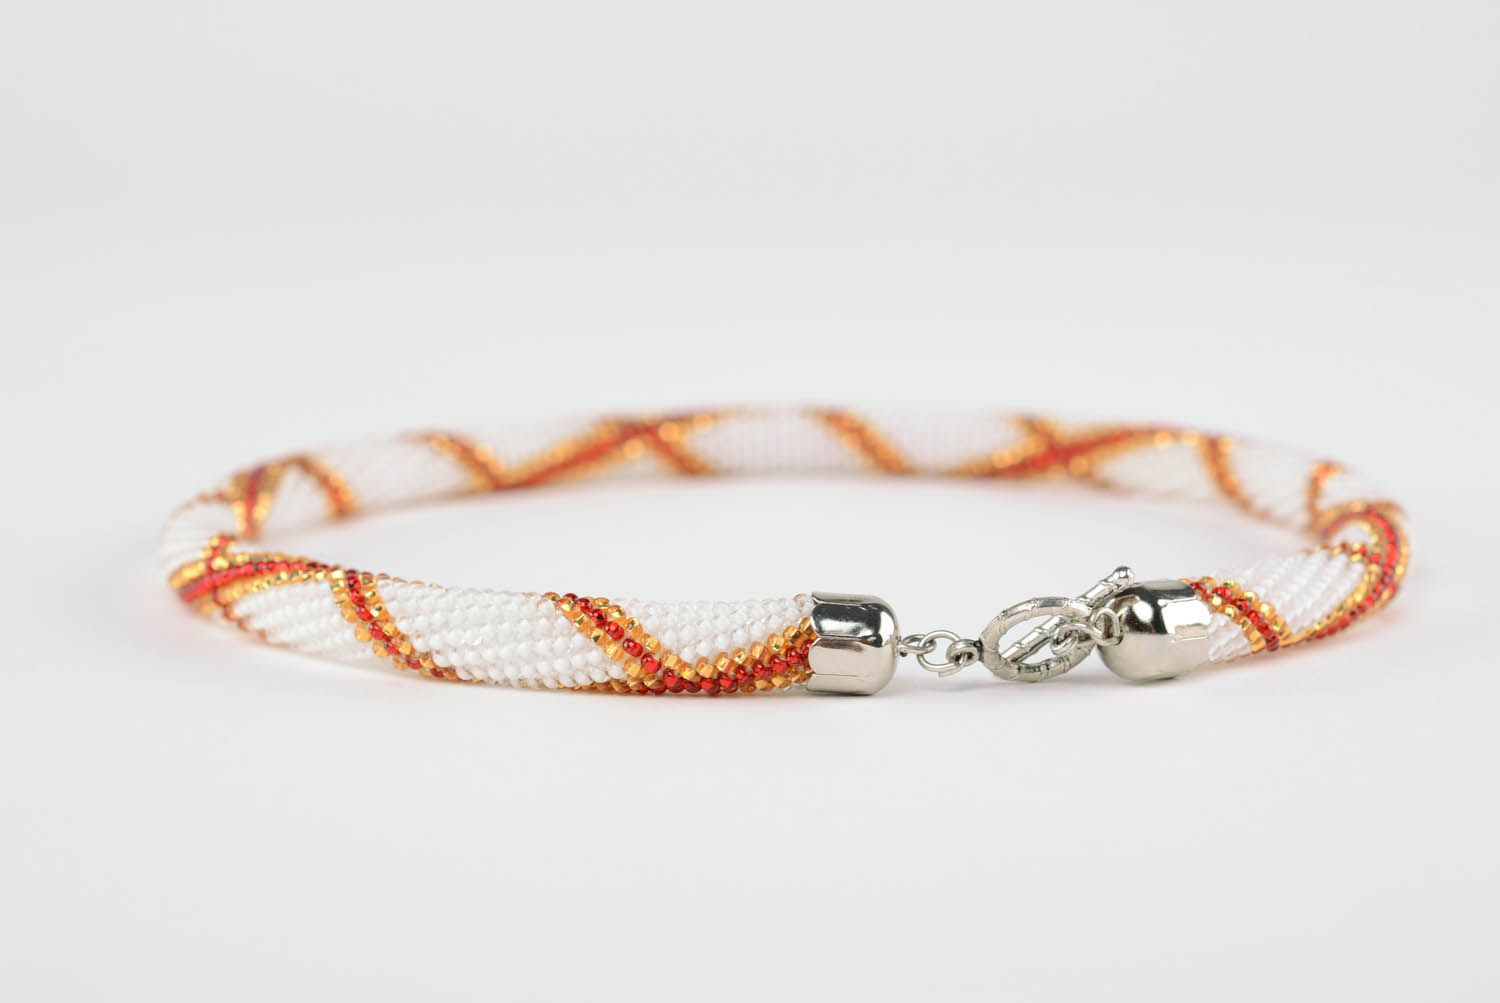 Handmade beaded cord necklace in white, red, and orange beads photo 1